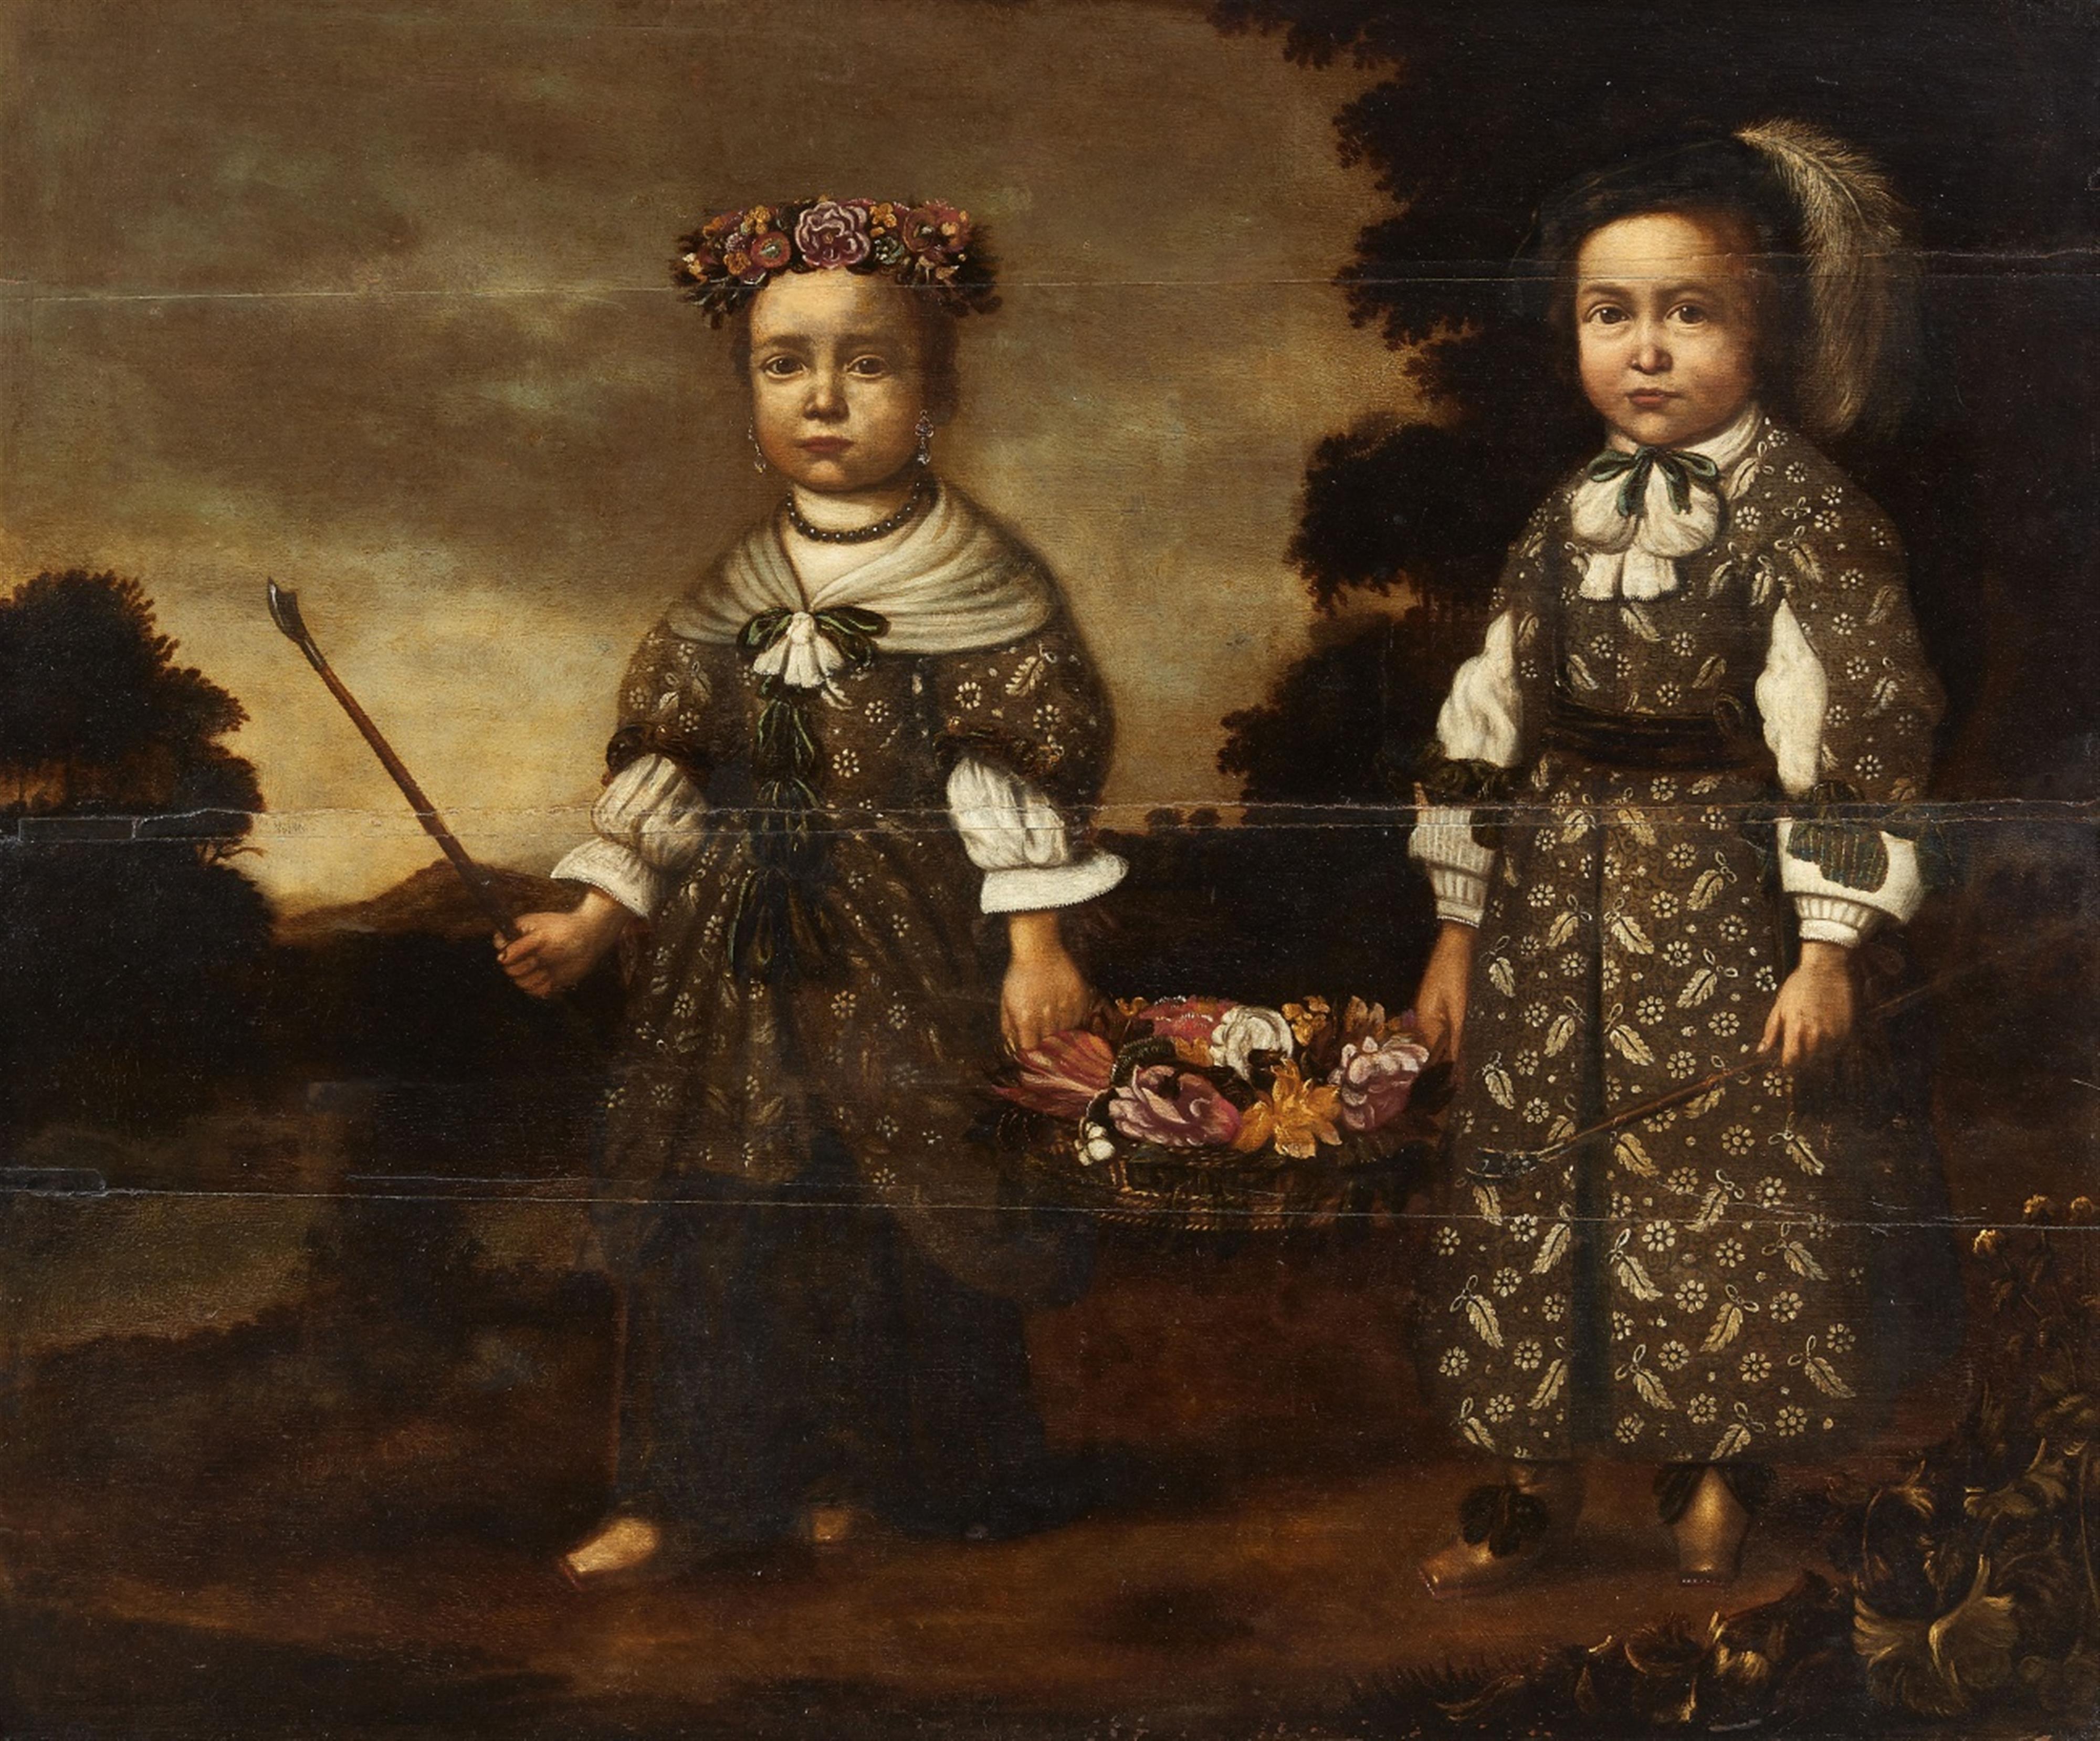 Flemish School 17th century - Portrait of two Children with a Basket of Flowers - image-1